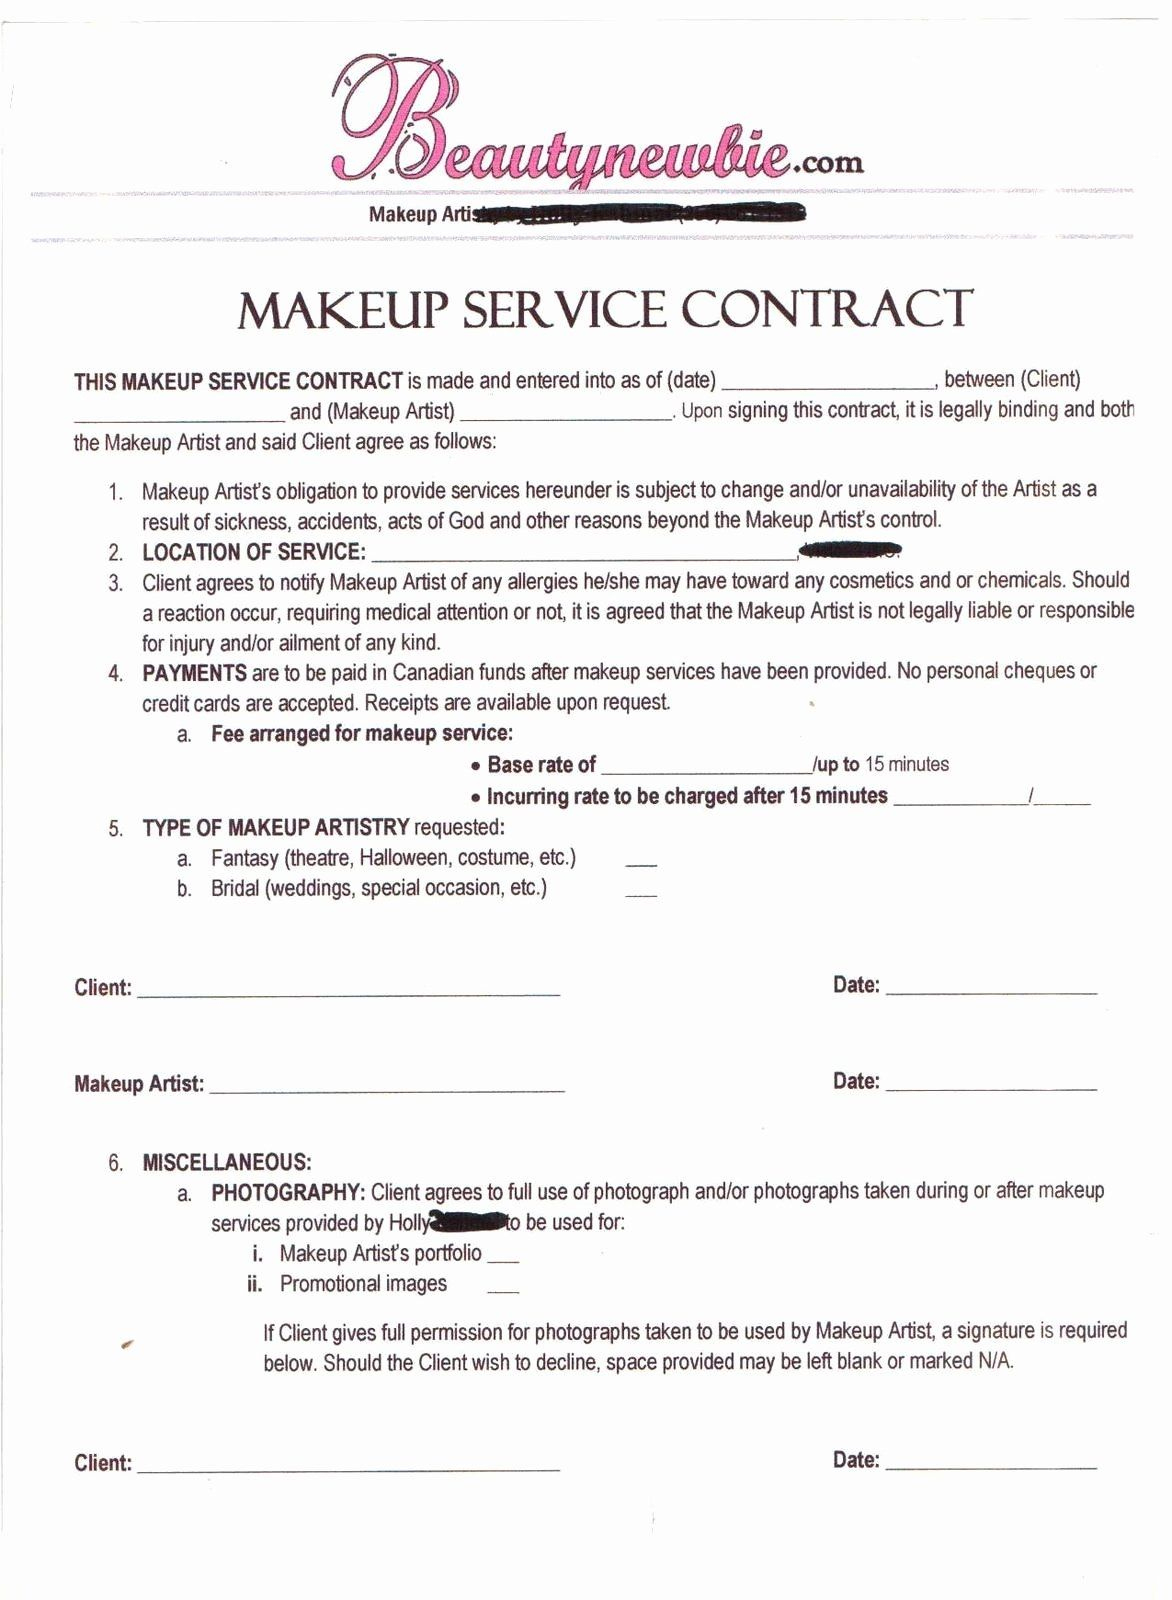 Amazing Hair Stylist Contract Agreement Sample